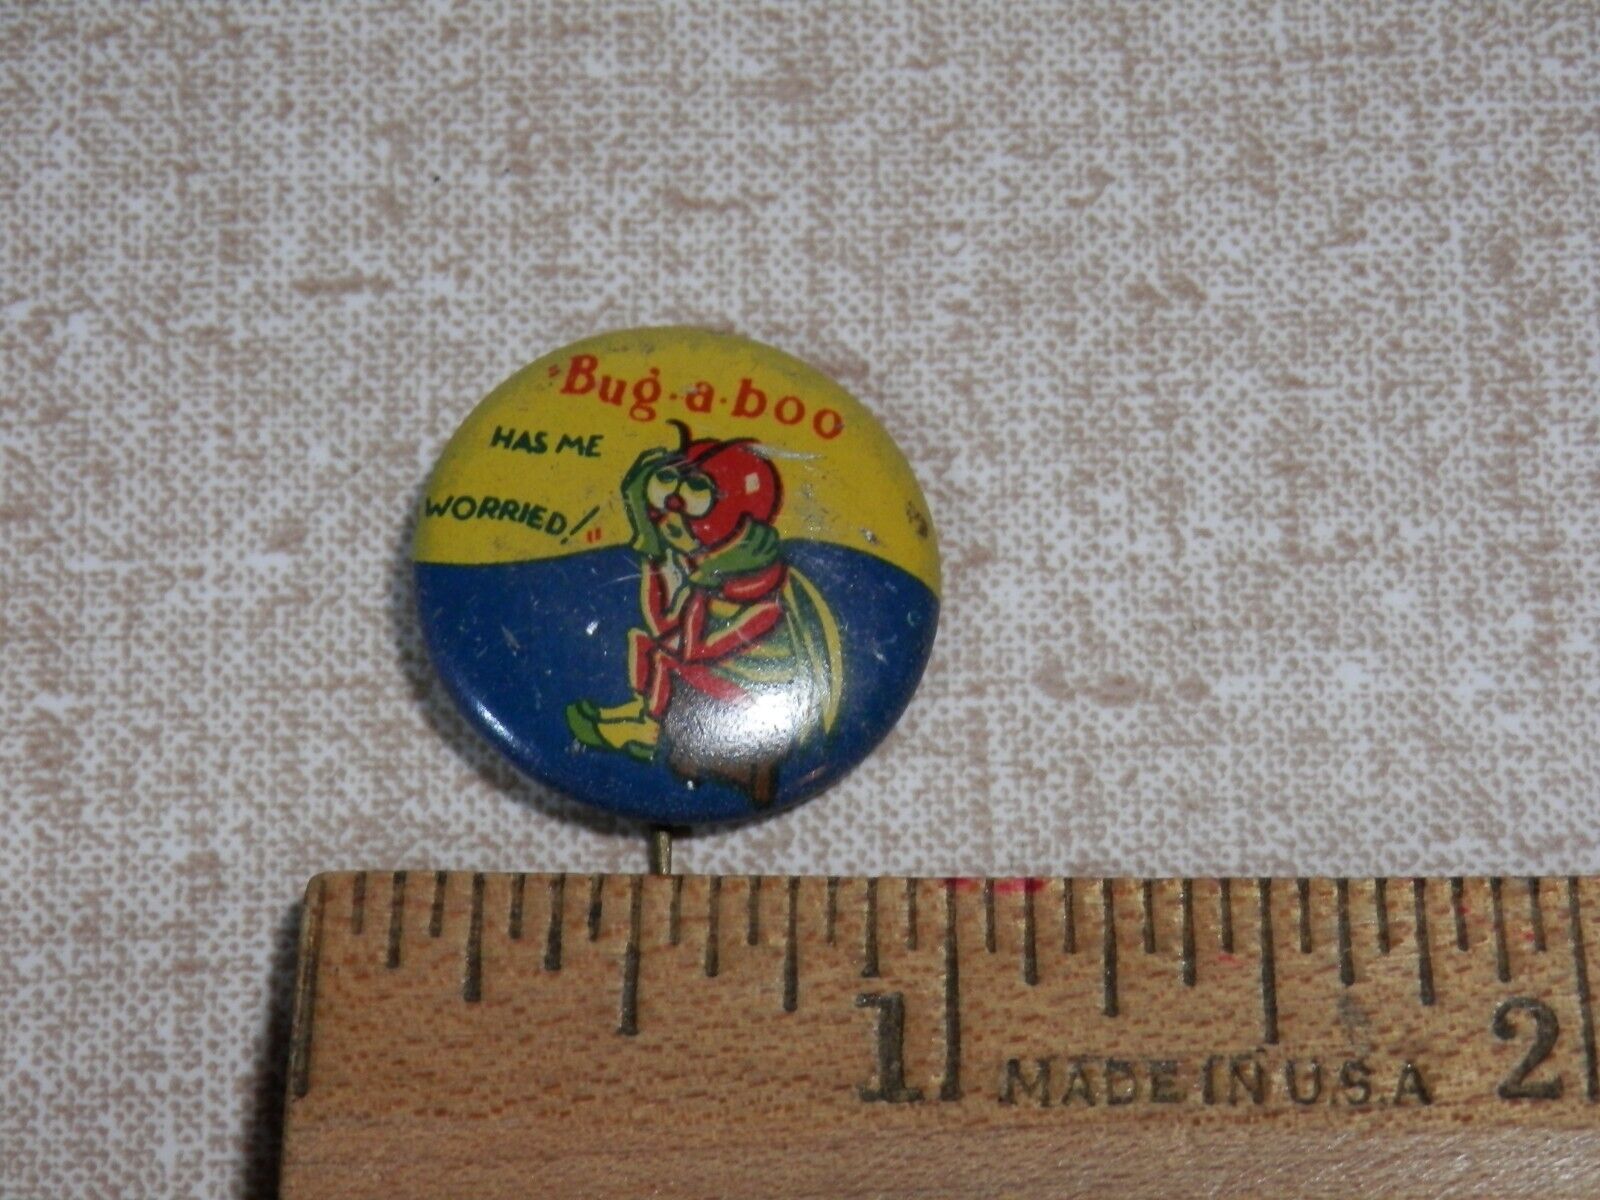 Vintage Bug-a-Boo Has Me Worried Pin Pinback Advertising Pesticide